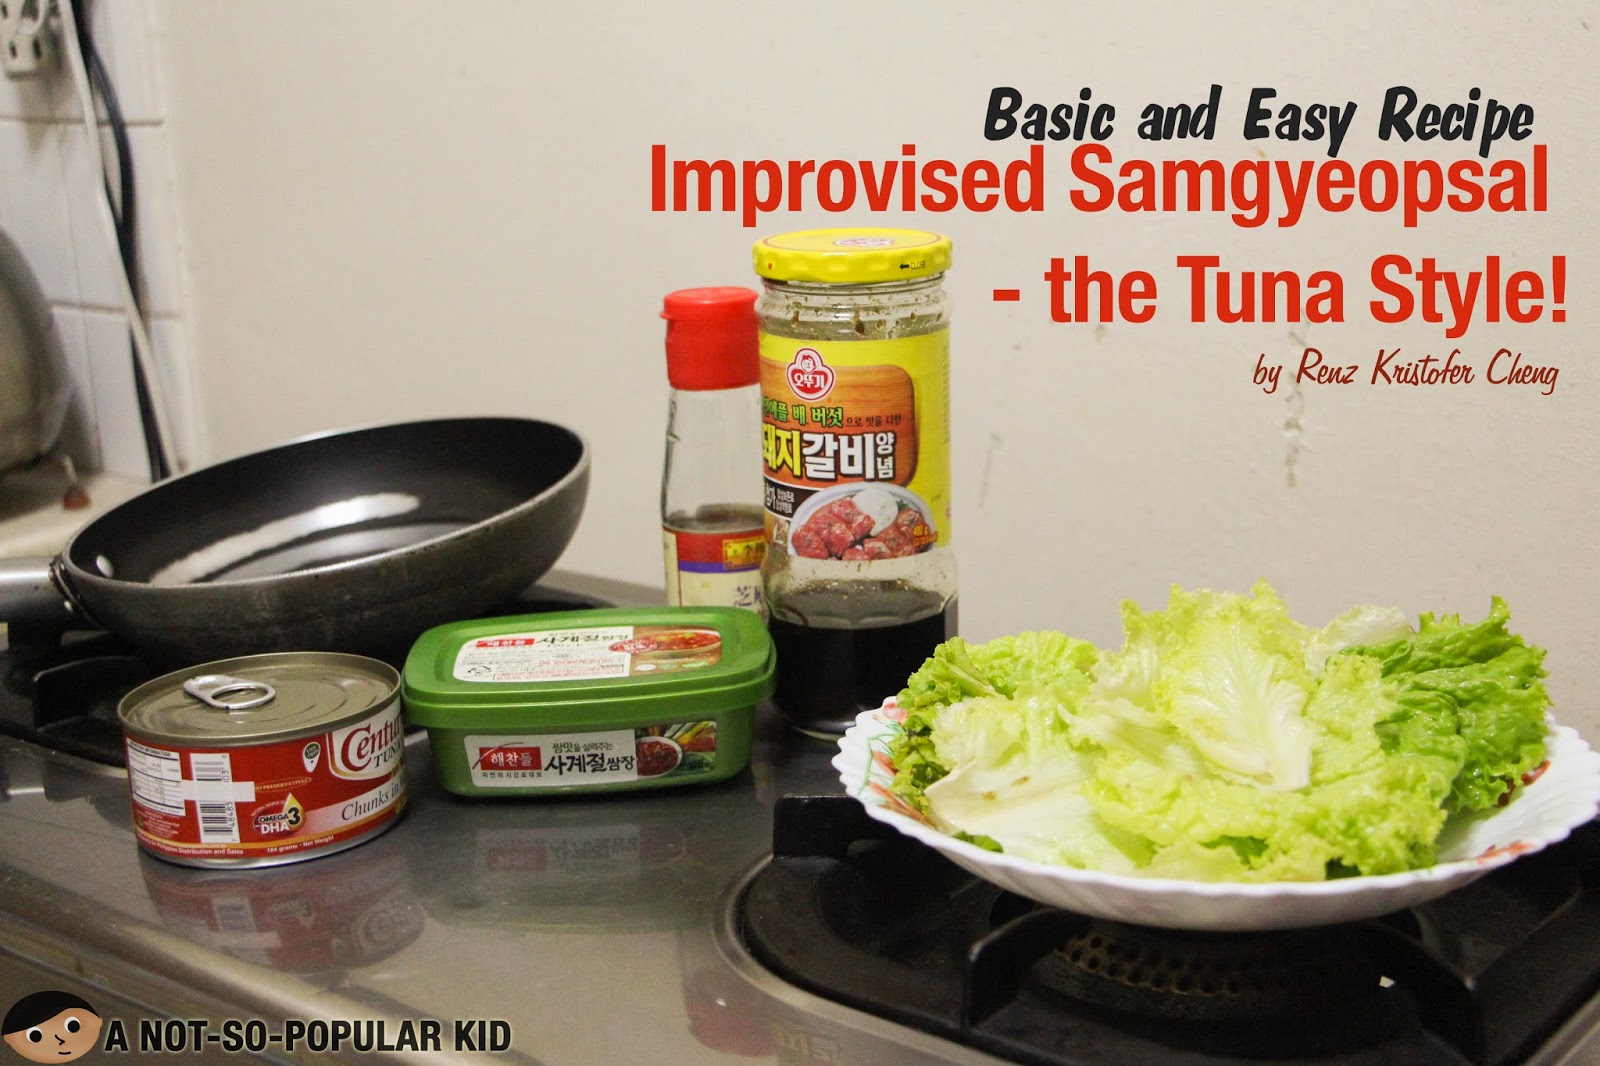 Cooking "Samgyeopsal" at Home Using Canned Tuna for an Instant Dish